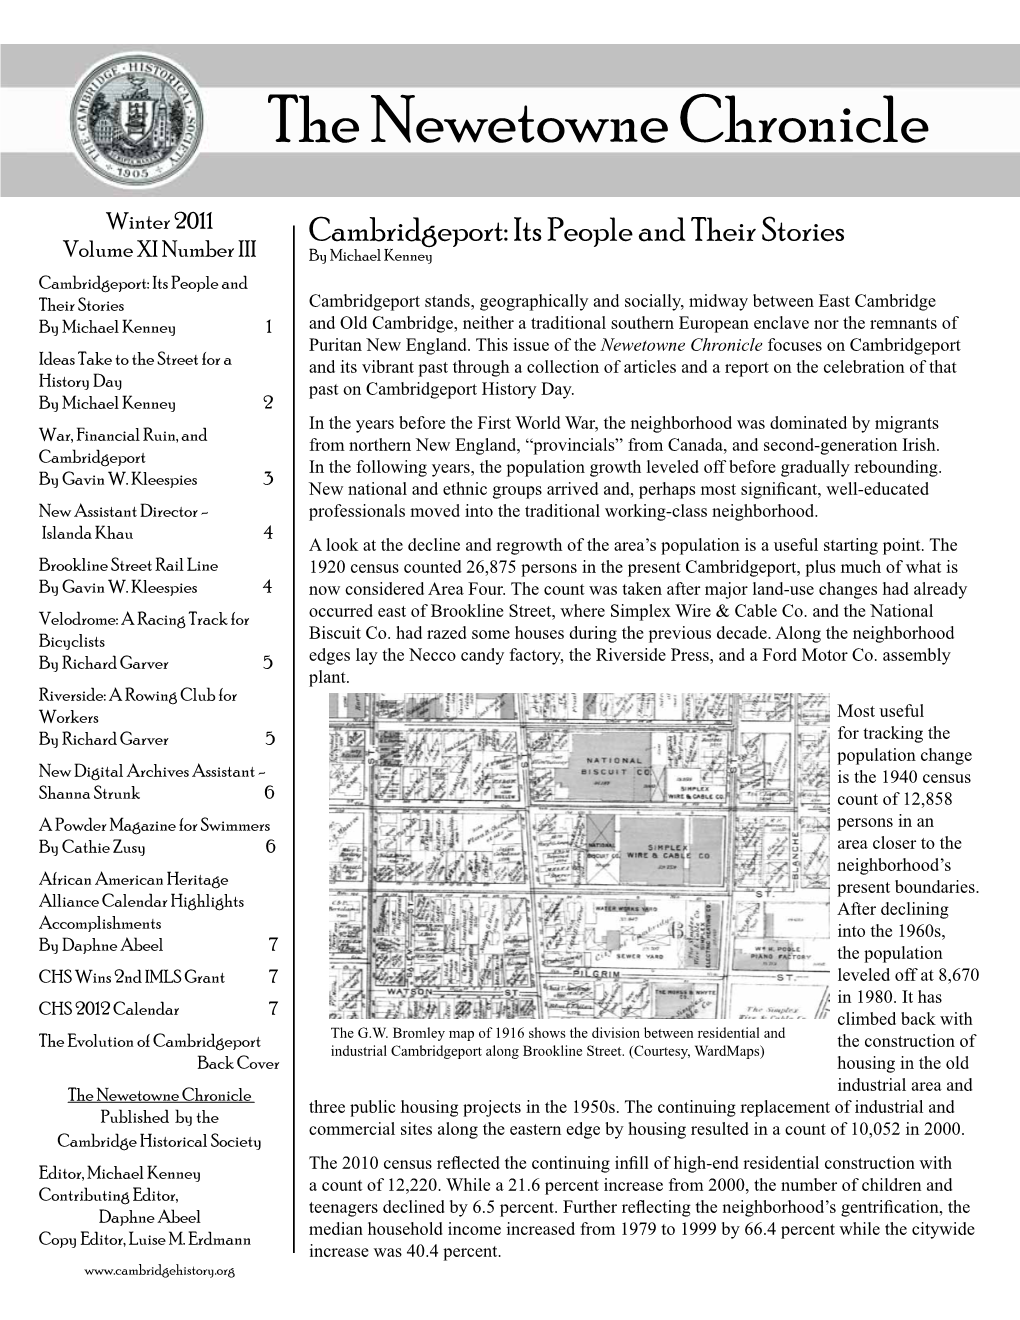 The Newetowne Chronicle